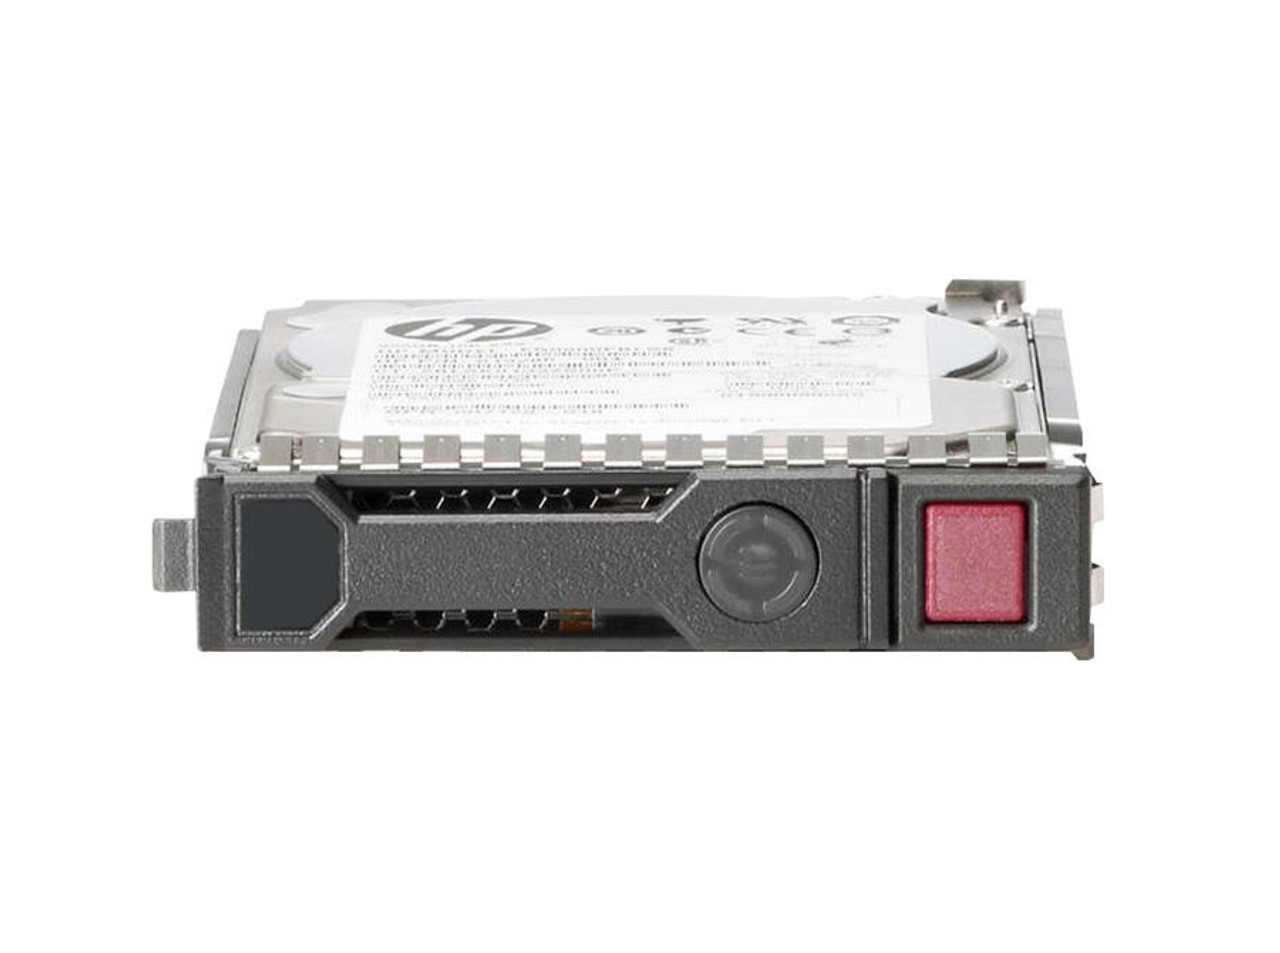 872475R-B21 HPE 300GB 10000RPM SAS 12Gbps 2.5-inch Internal Hard Drive with Smart Carrier